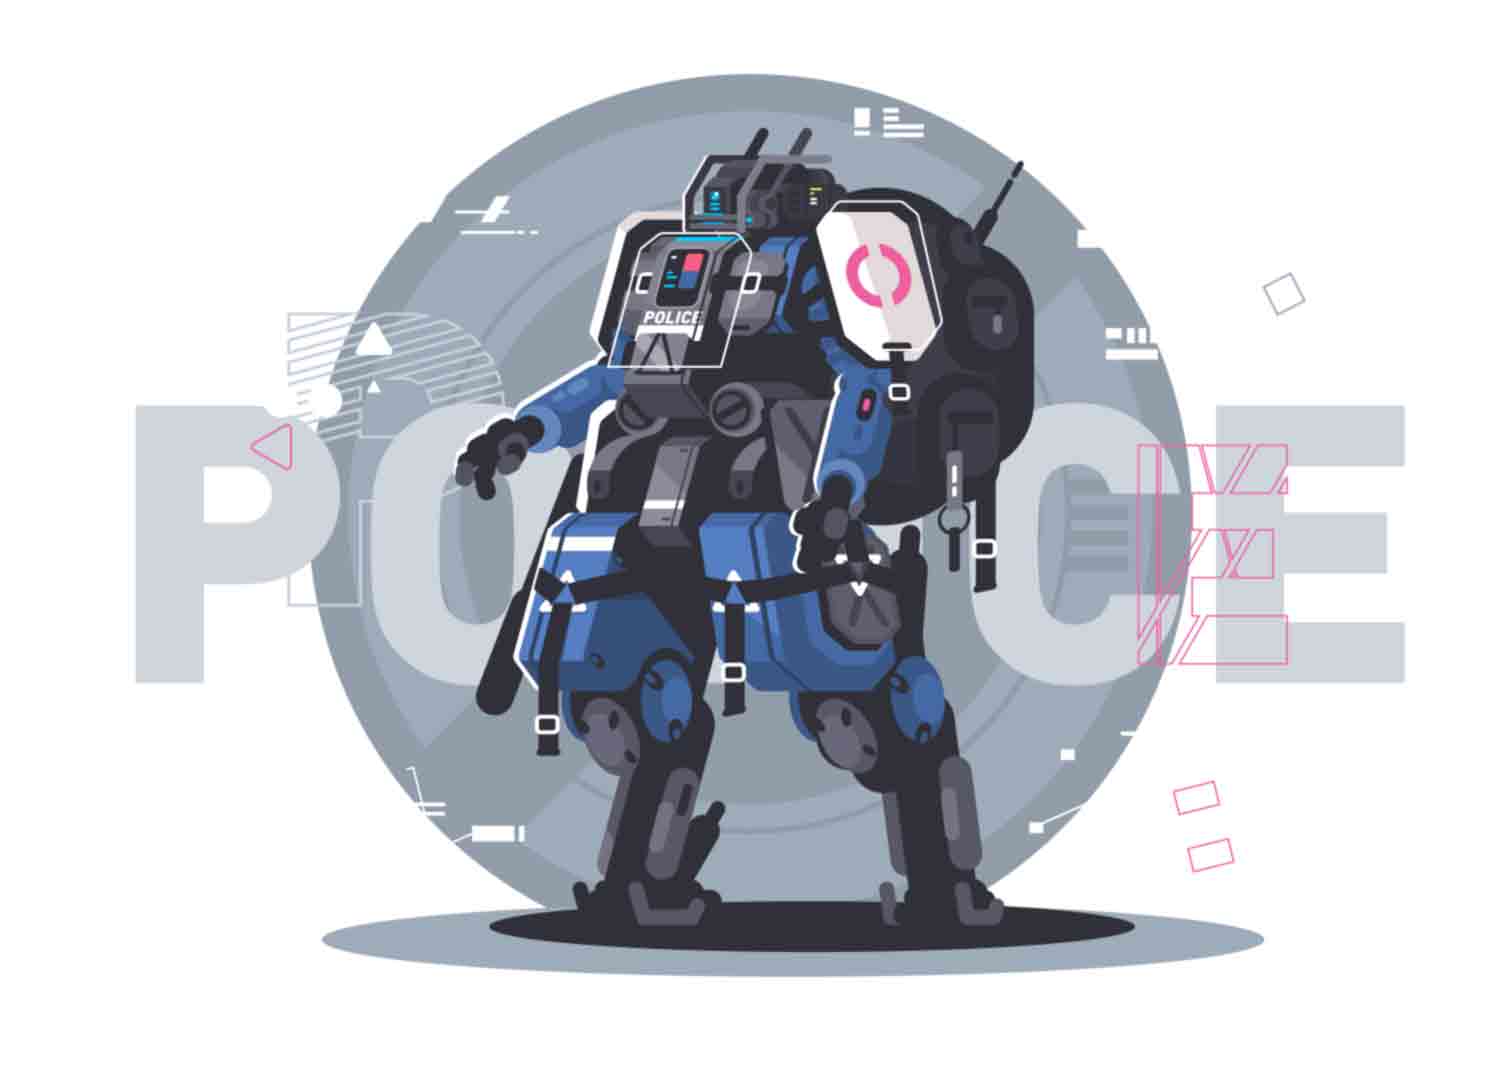 Vector illustrations of hi tech cyber technologies of the near future, advanced drones and robots characters.